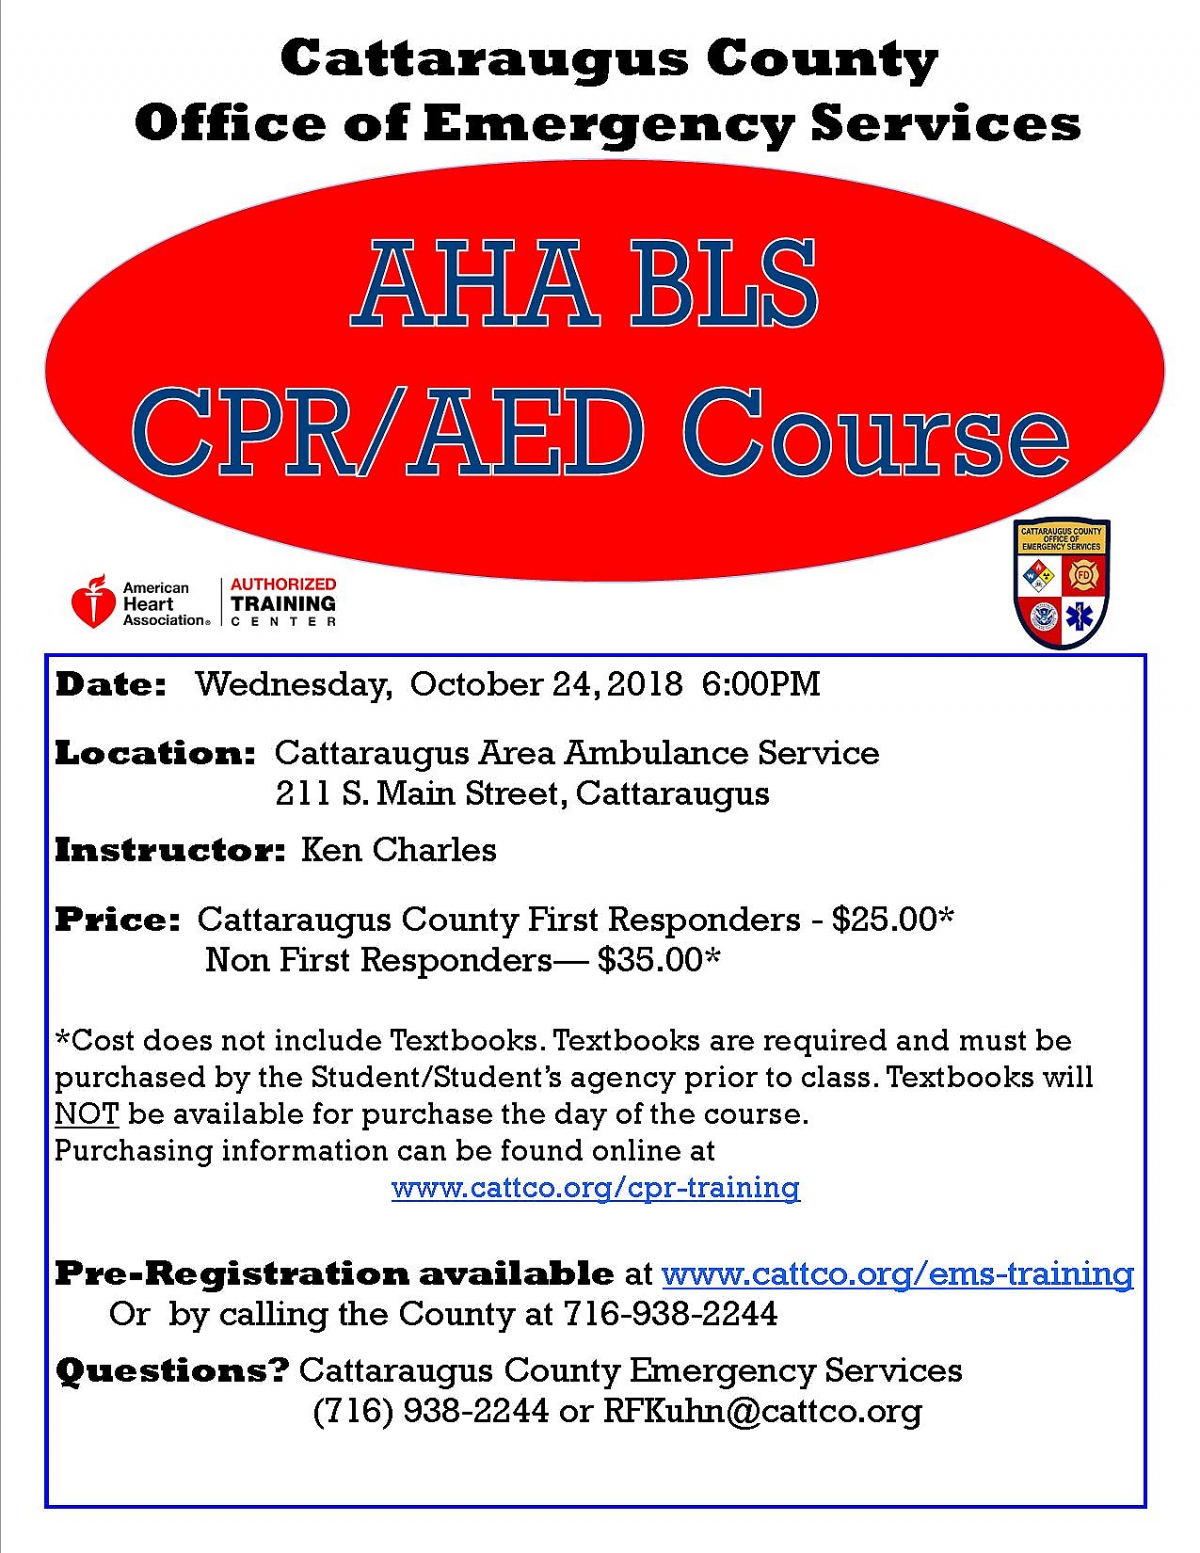 AHA BLS CPR/AED Course